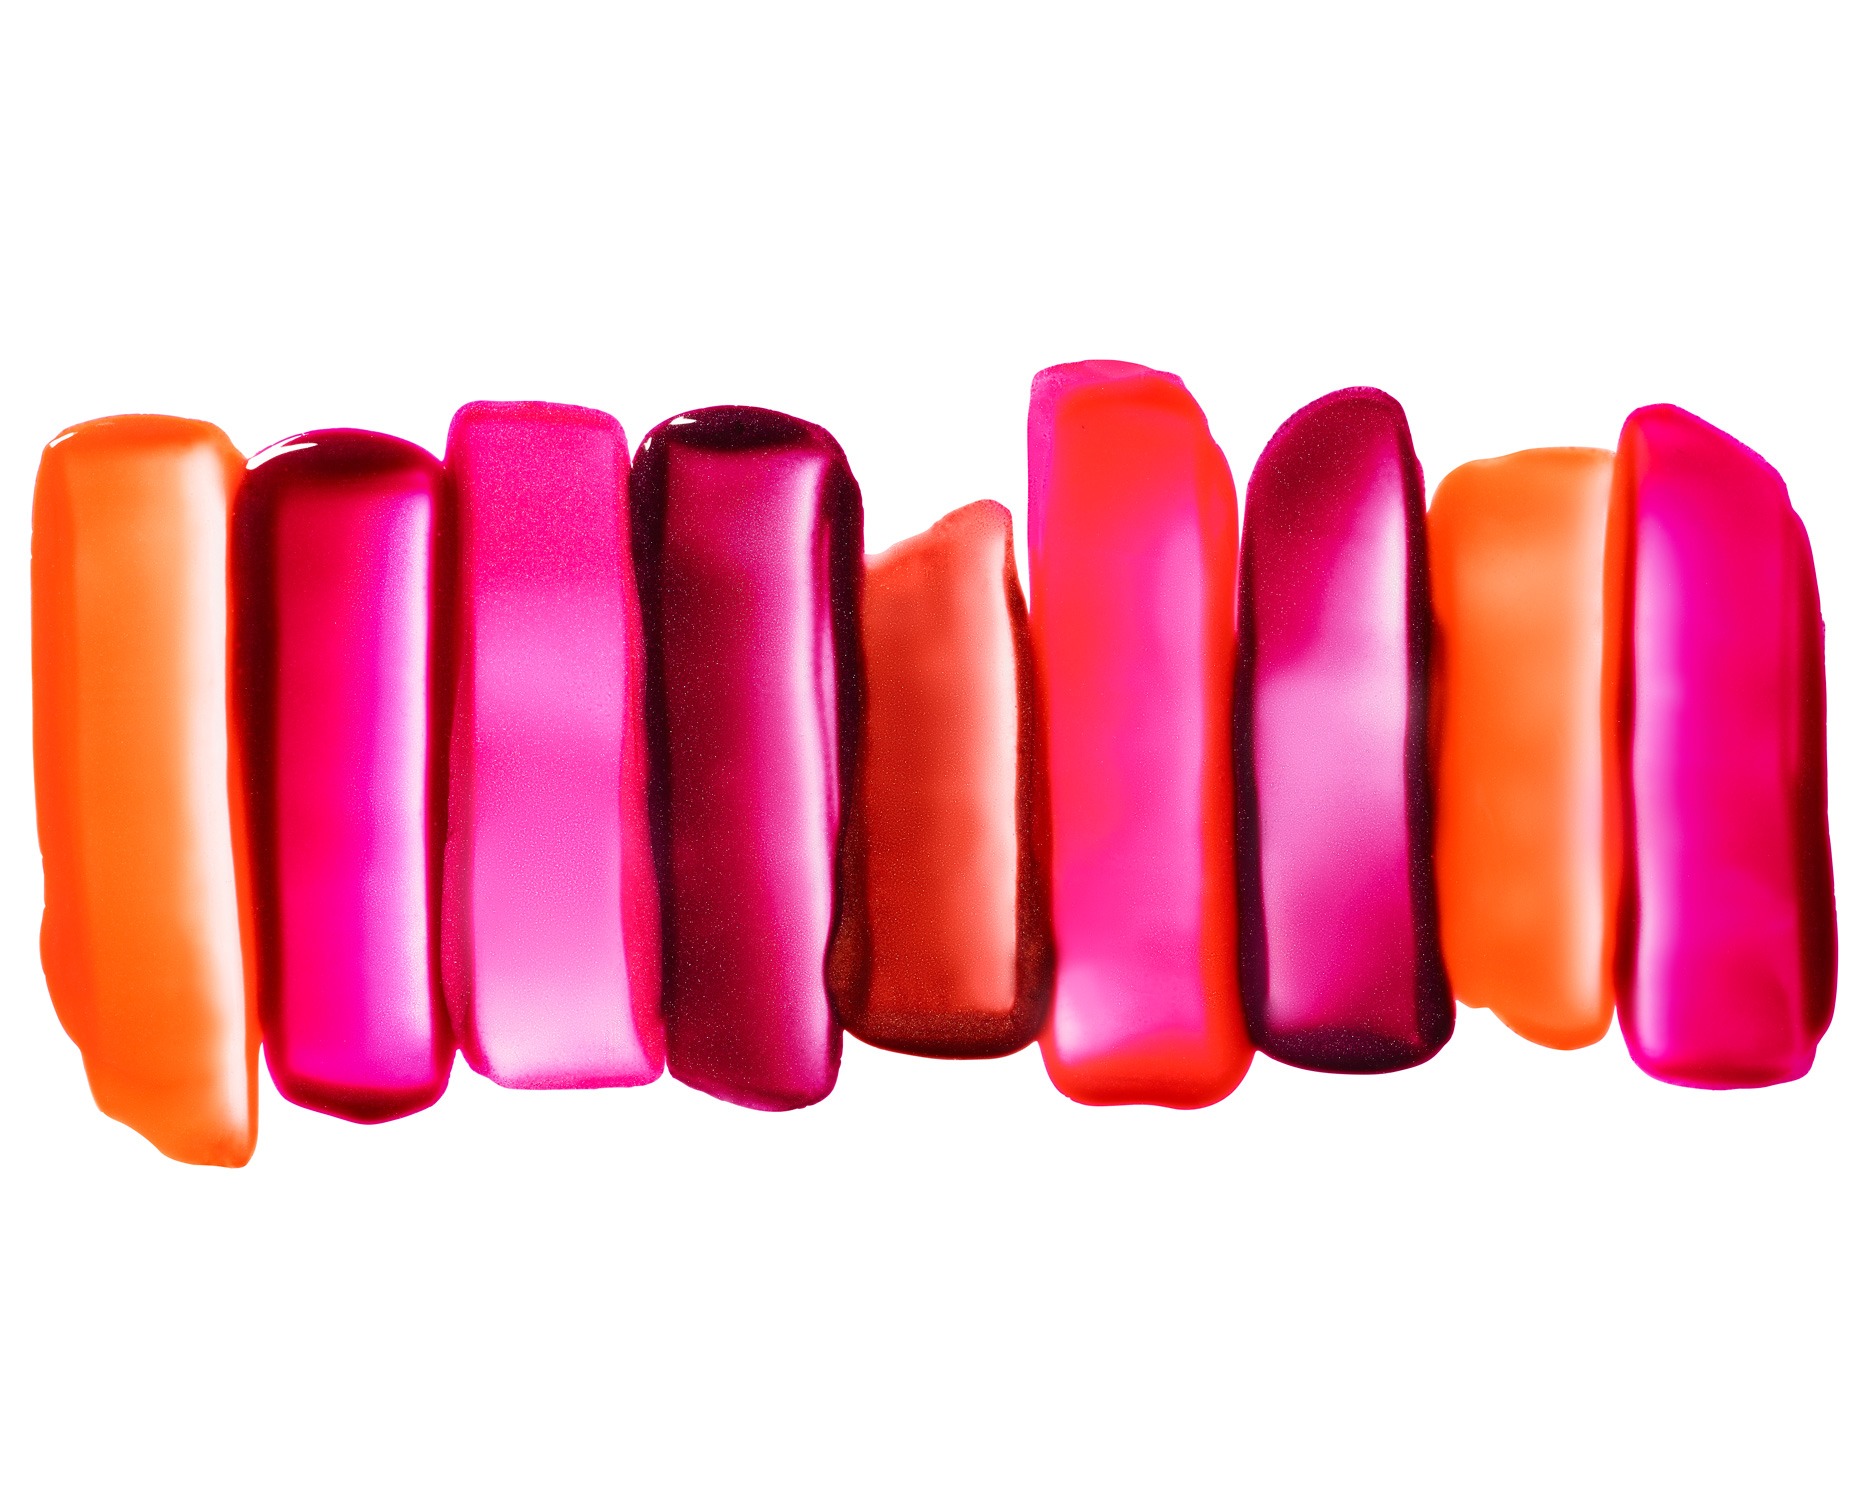 Sephora Statistics: Analyzing Beauty Trends and Success